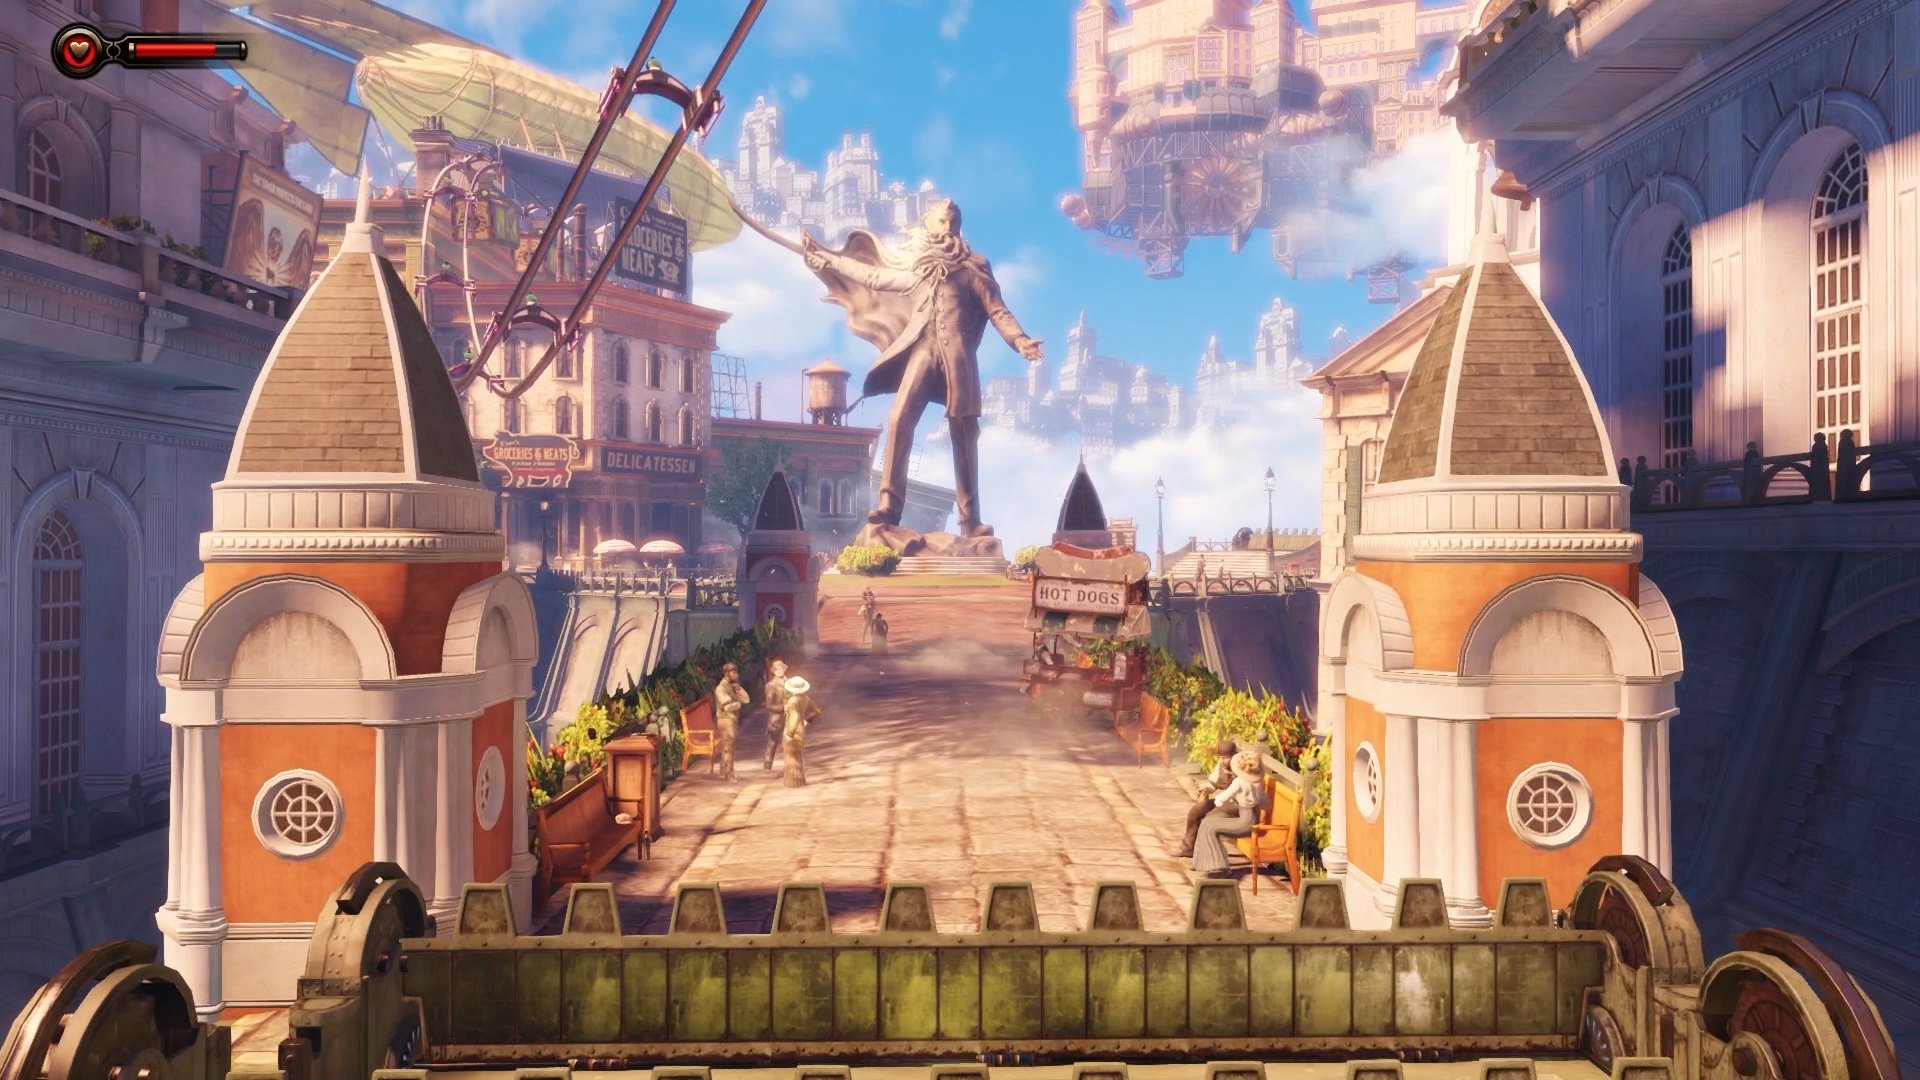 Bioshock Infinite on a $375 PC vs PS4  Bioshock The Collection on The $375  Potato Masher 